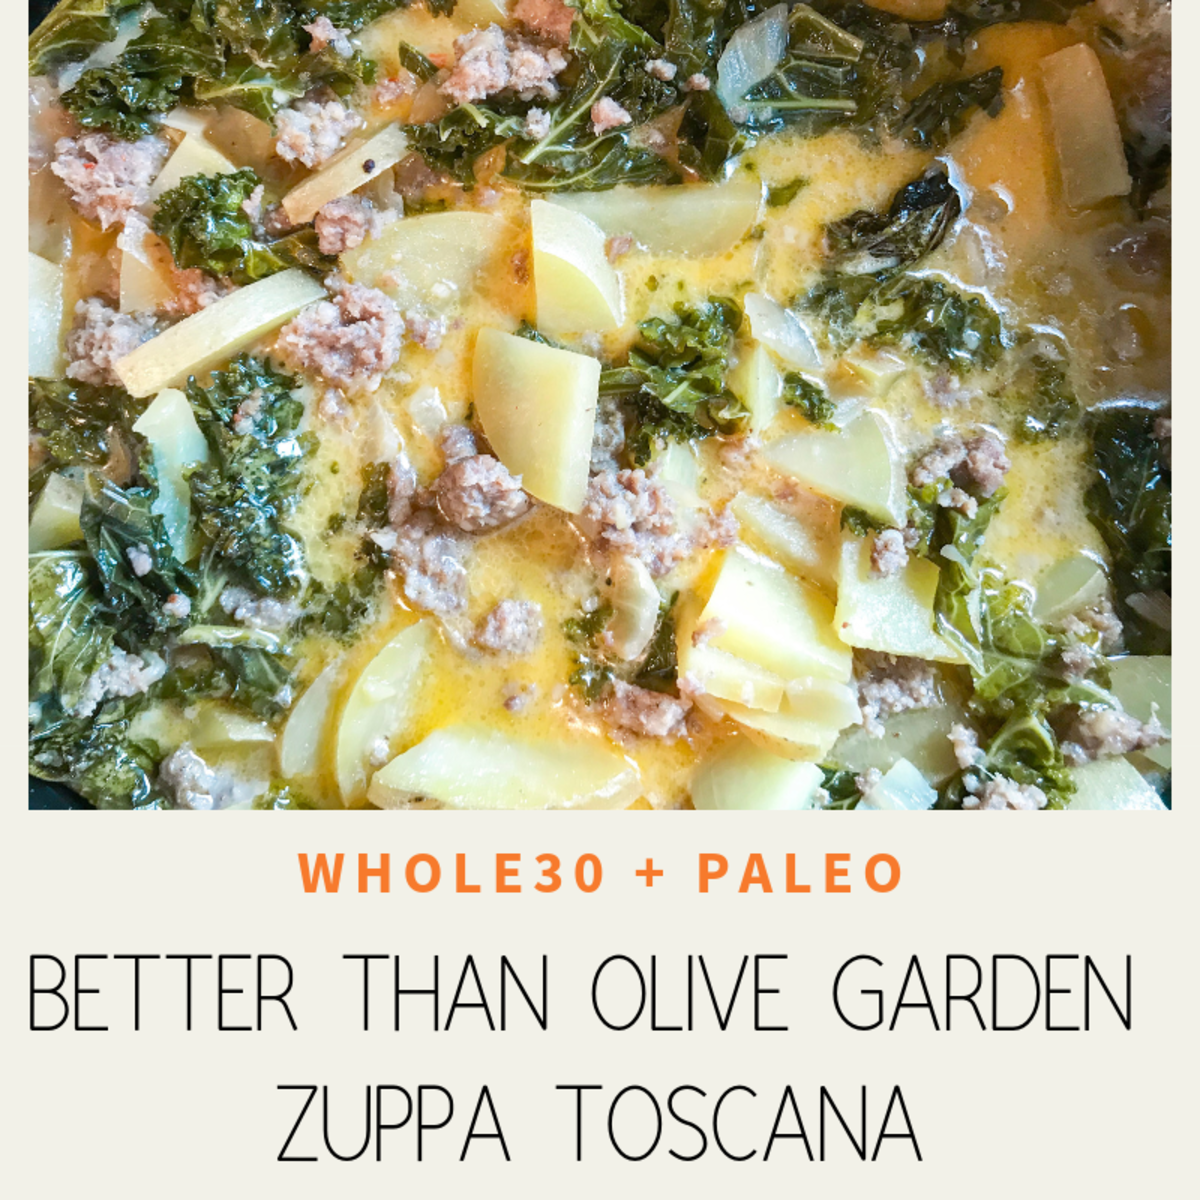 This crockpot Zuppa Toscana recipe comes out better than Olive Garden's version (in my opinion!).